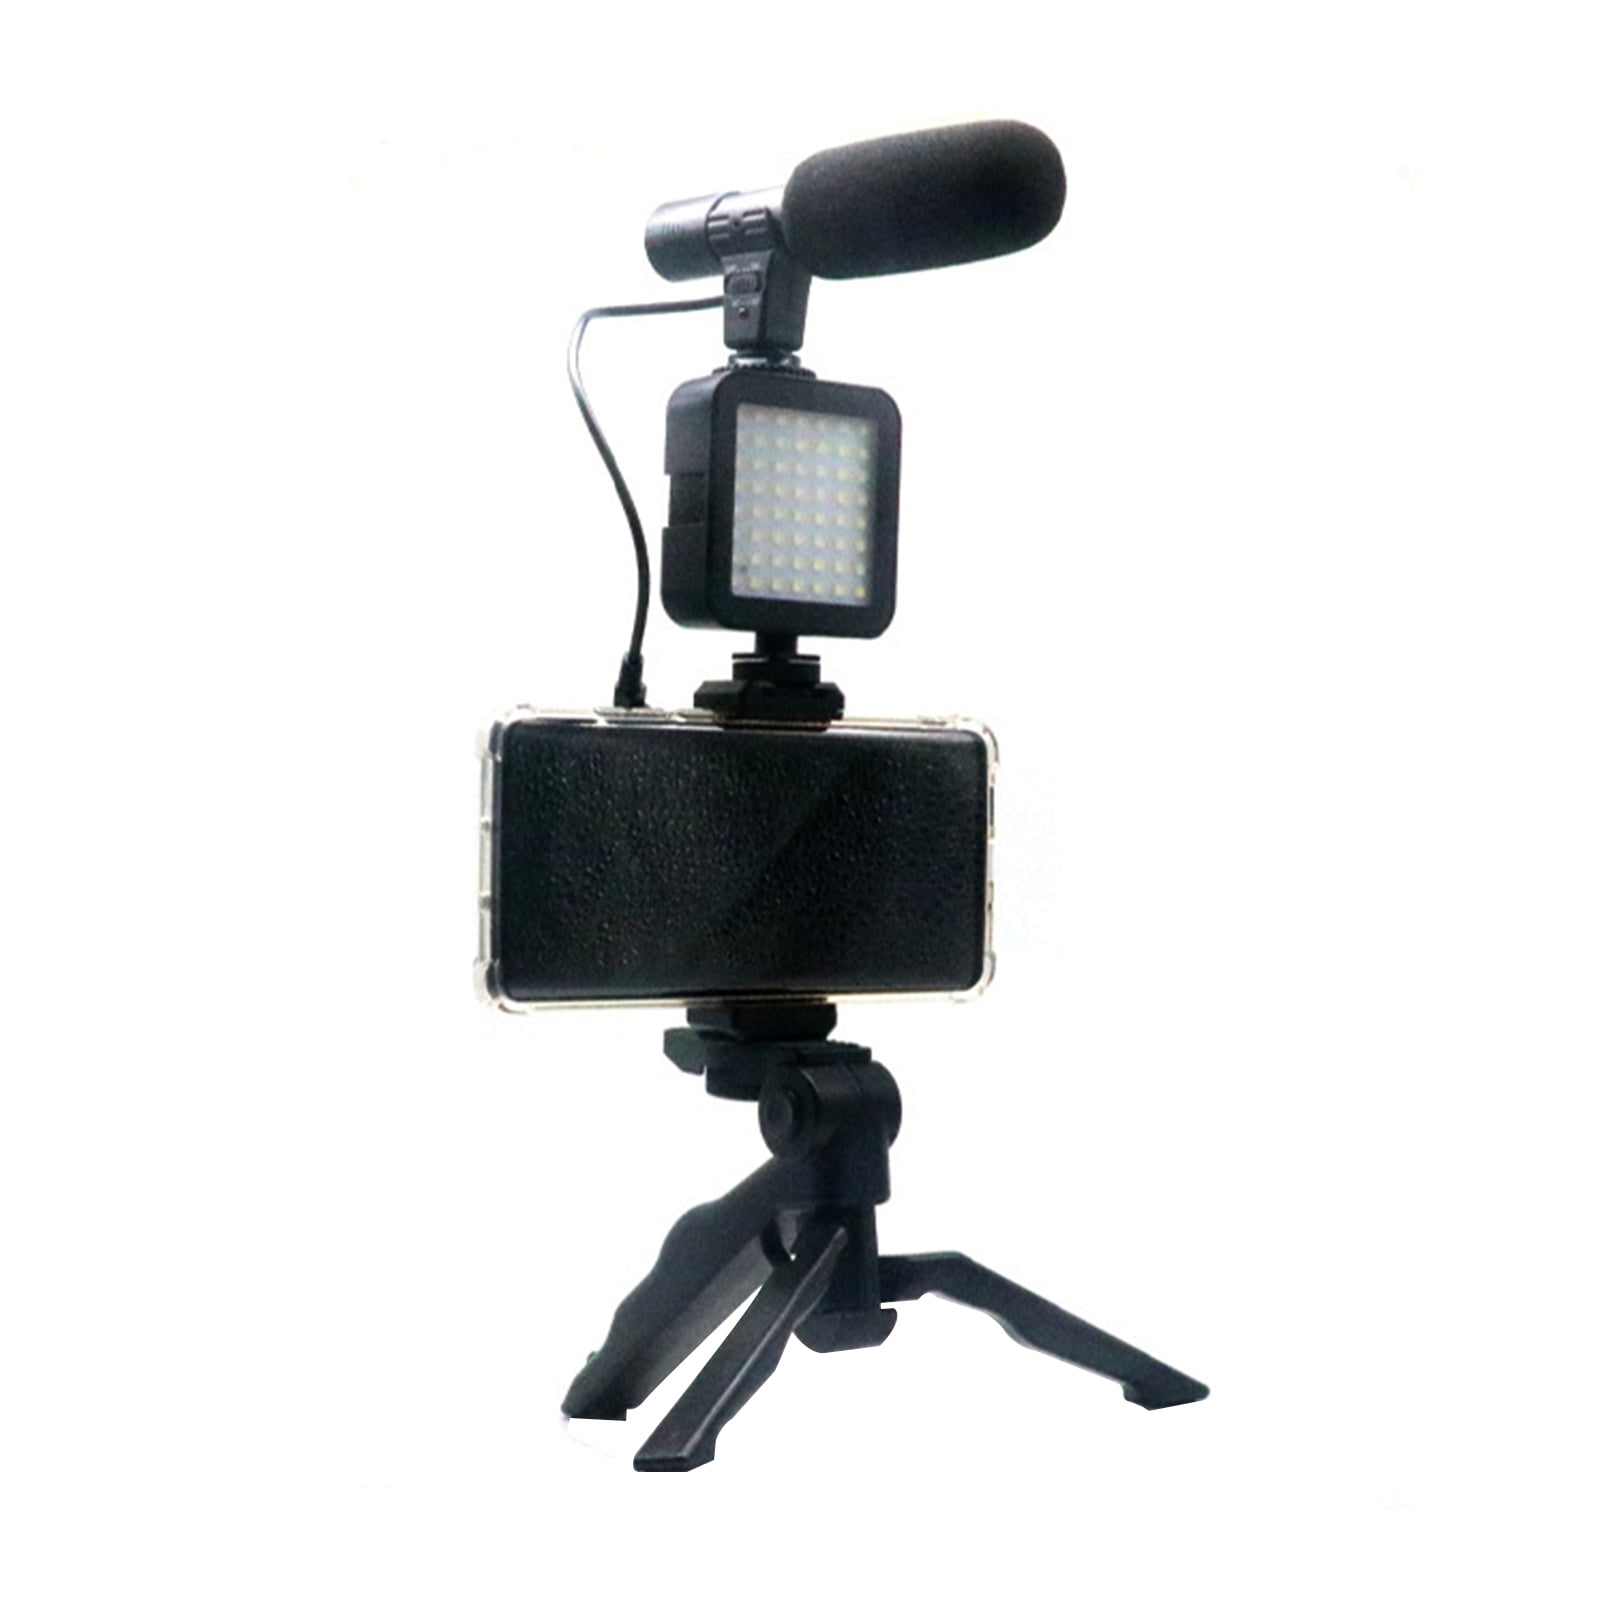 Lightweight Fill Lamp Set Video Conference Lighting Universal Portable Video Microphone Kit for Live Broadcast for Studio for Office for Home 01 Fill Light Set 